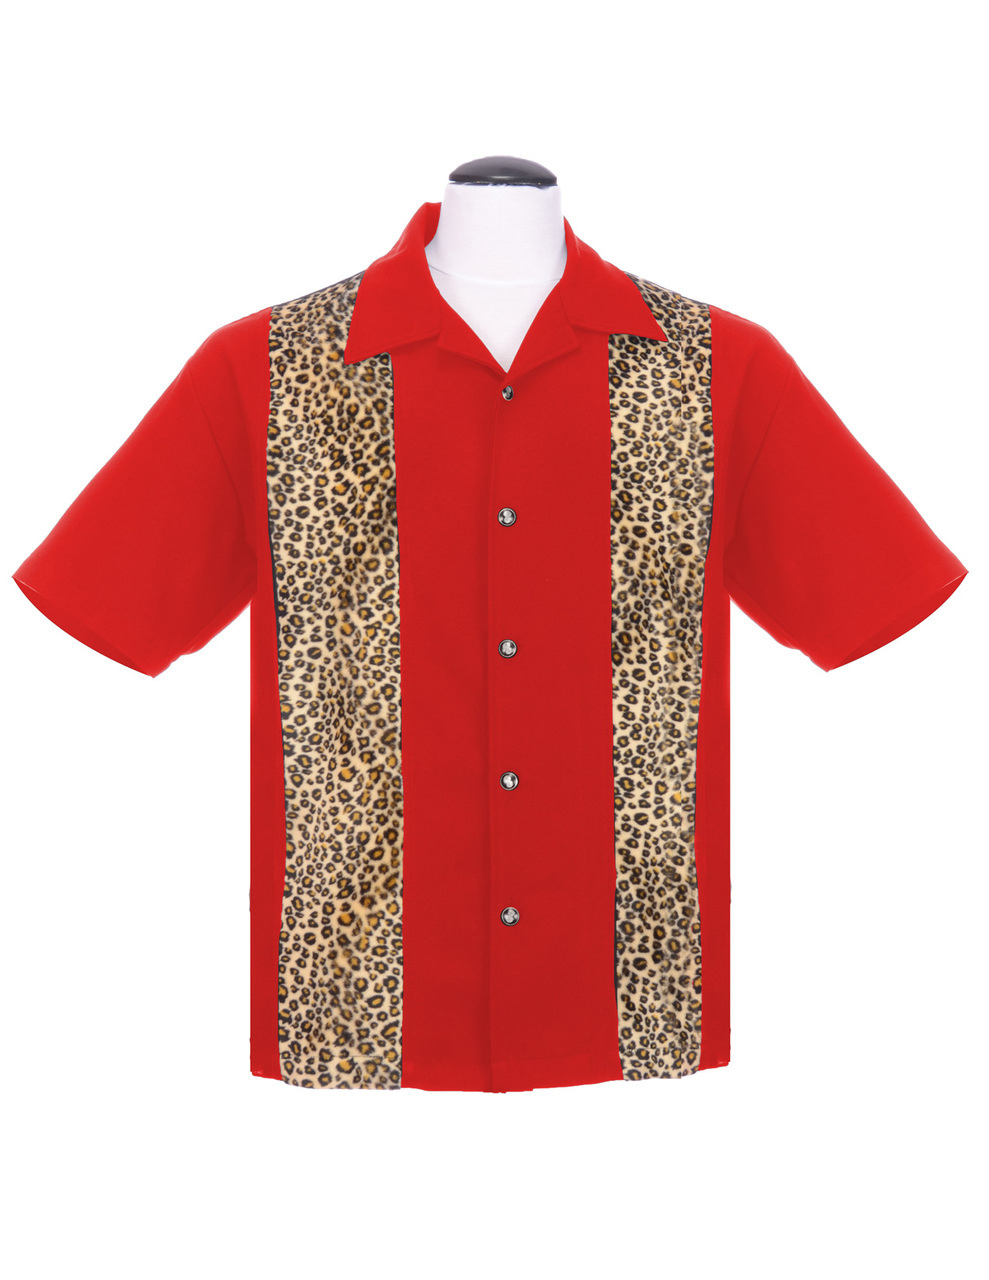 Red Leopard Panel Shirt by Last Call - Steady Clothing